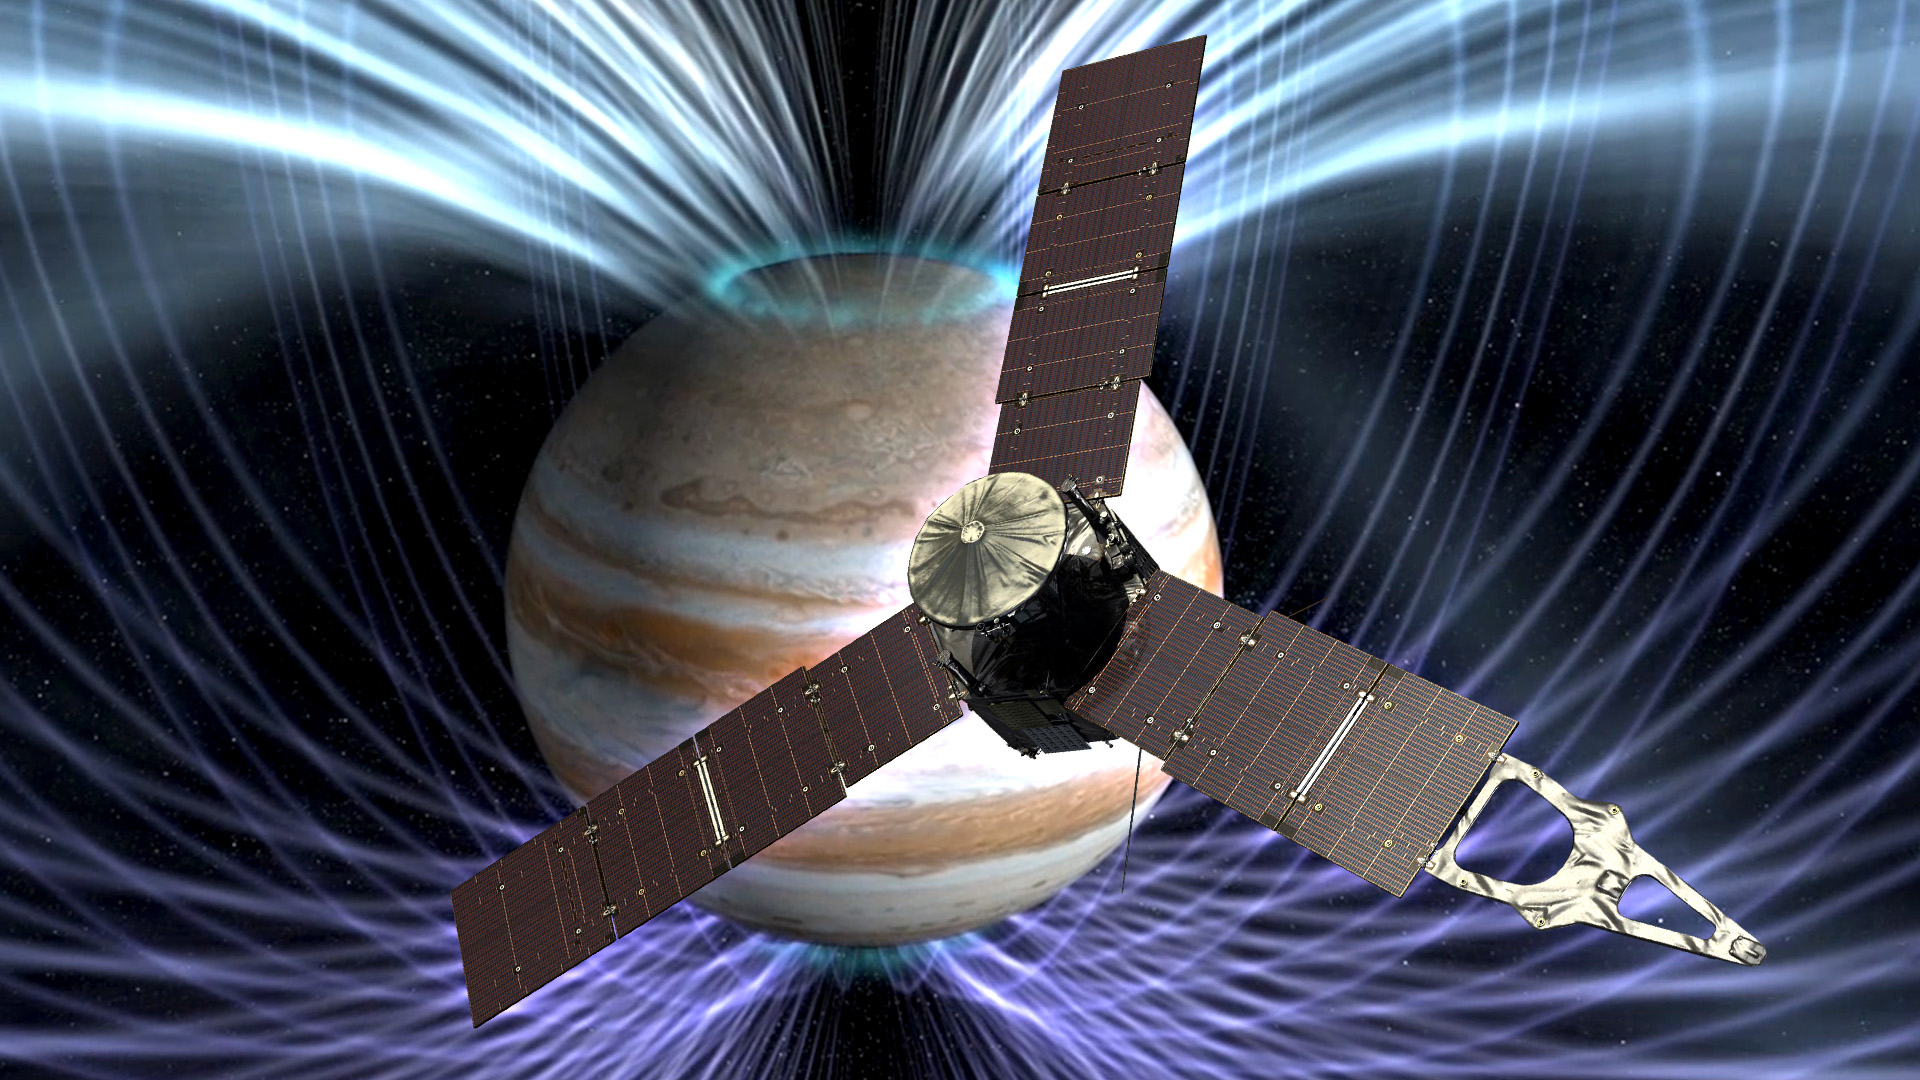 NASA is sending the Juno spacecraft to peer beneath the cloudy surface of Jupiter. Juno's twin magnetometers, built at Goddard Space Flight Center, will give scientists their first look at the dynamo that drives Jupiter's vast magnetic field. Watch this video on the NASA Goddard YouTube channel.Complete transcript available.